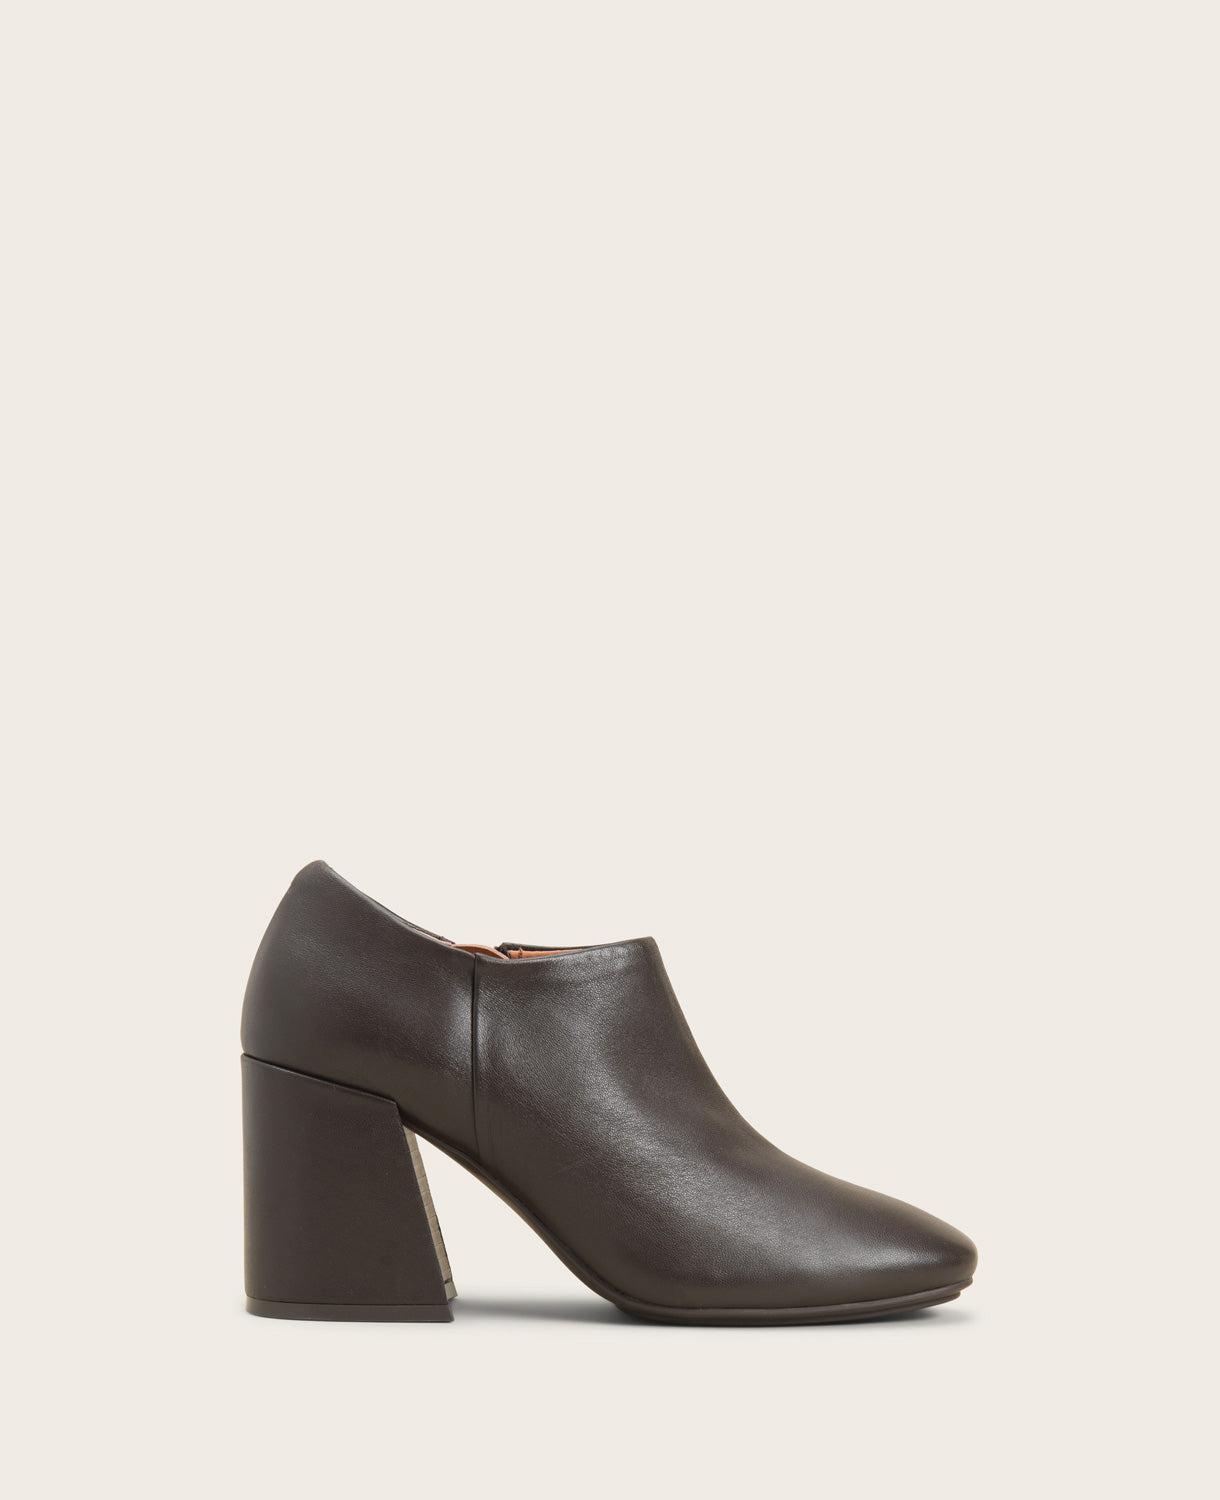 Gentle Souls by Kenneth Cole Isabel Shootie (Chocolate) Women's Shoes Product Image